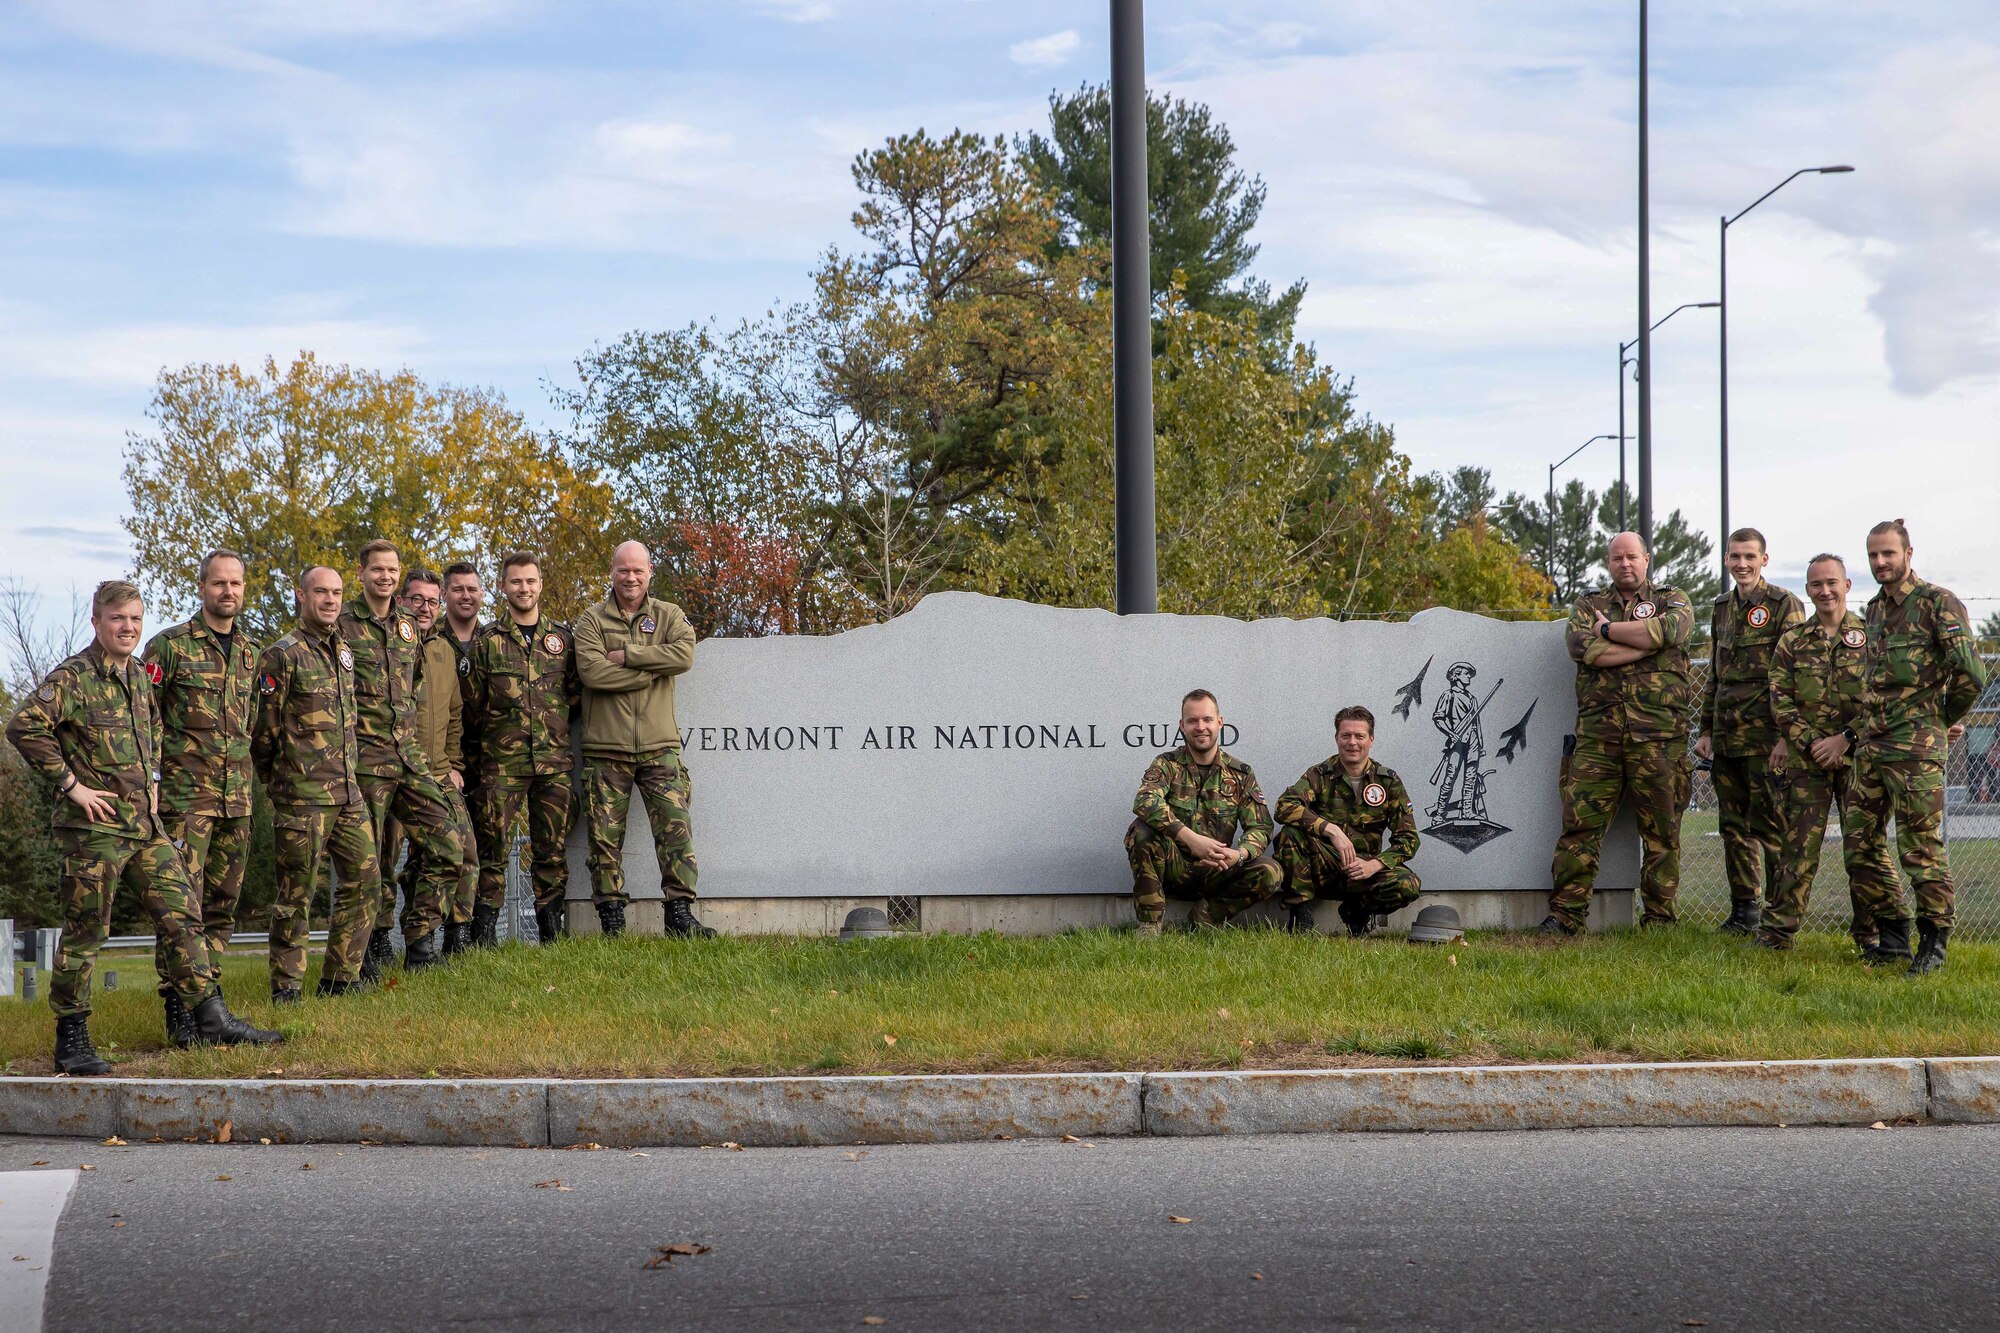 Members of the Royal Netherlands Air Force stand for a group portrait prior to their departure from the Vermont Air National Guard base.